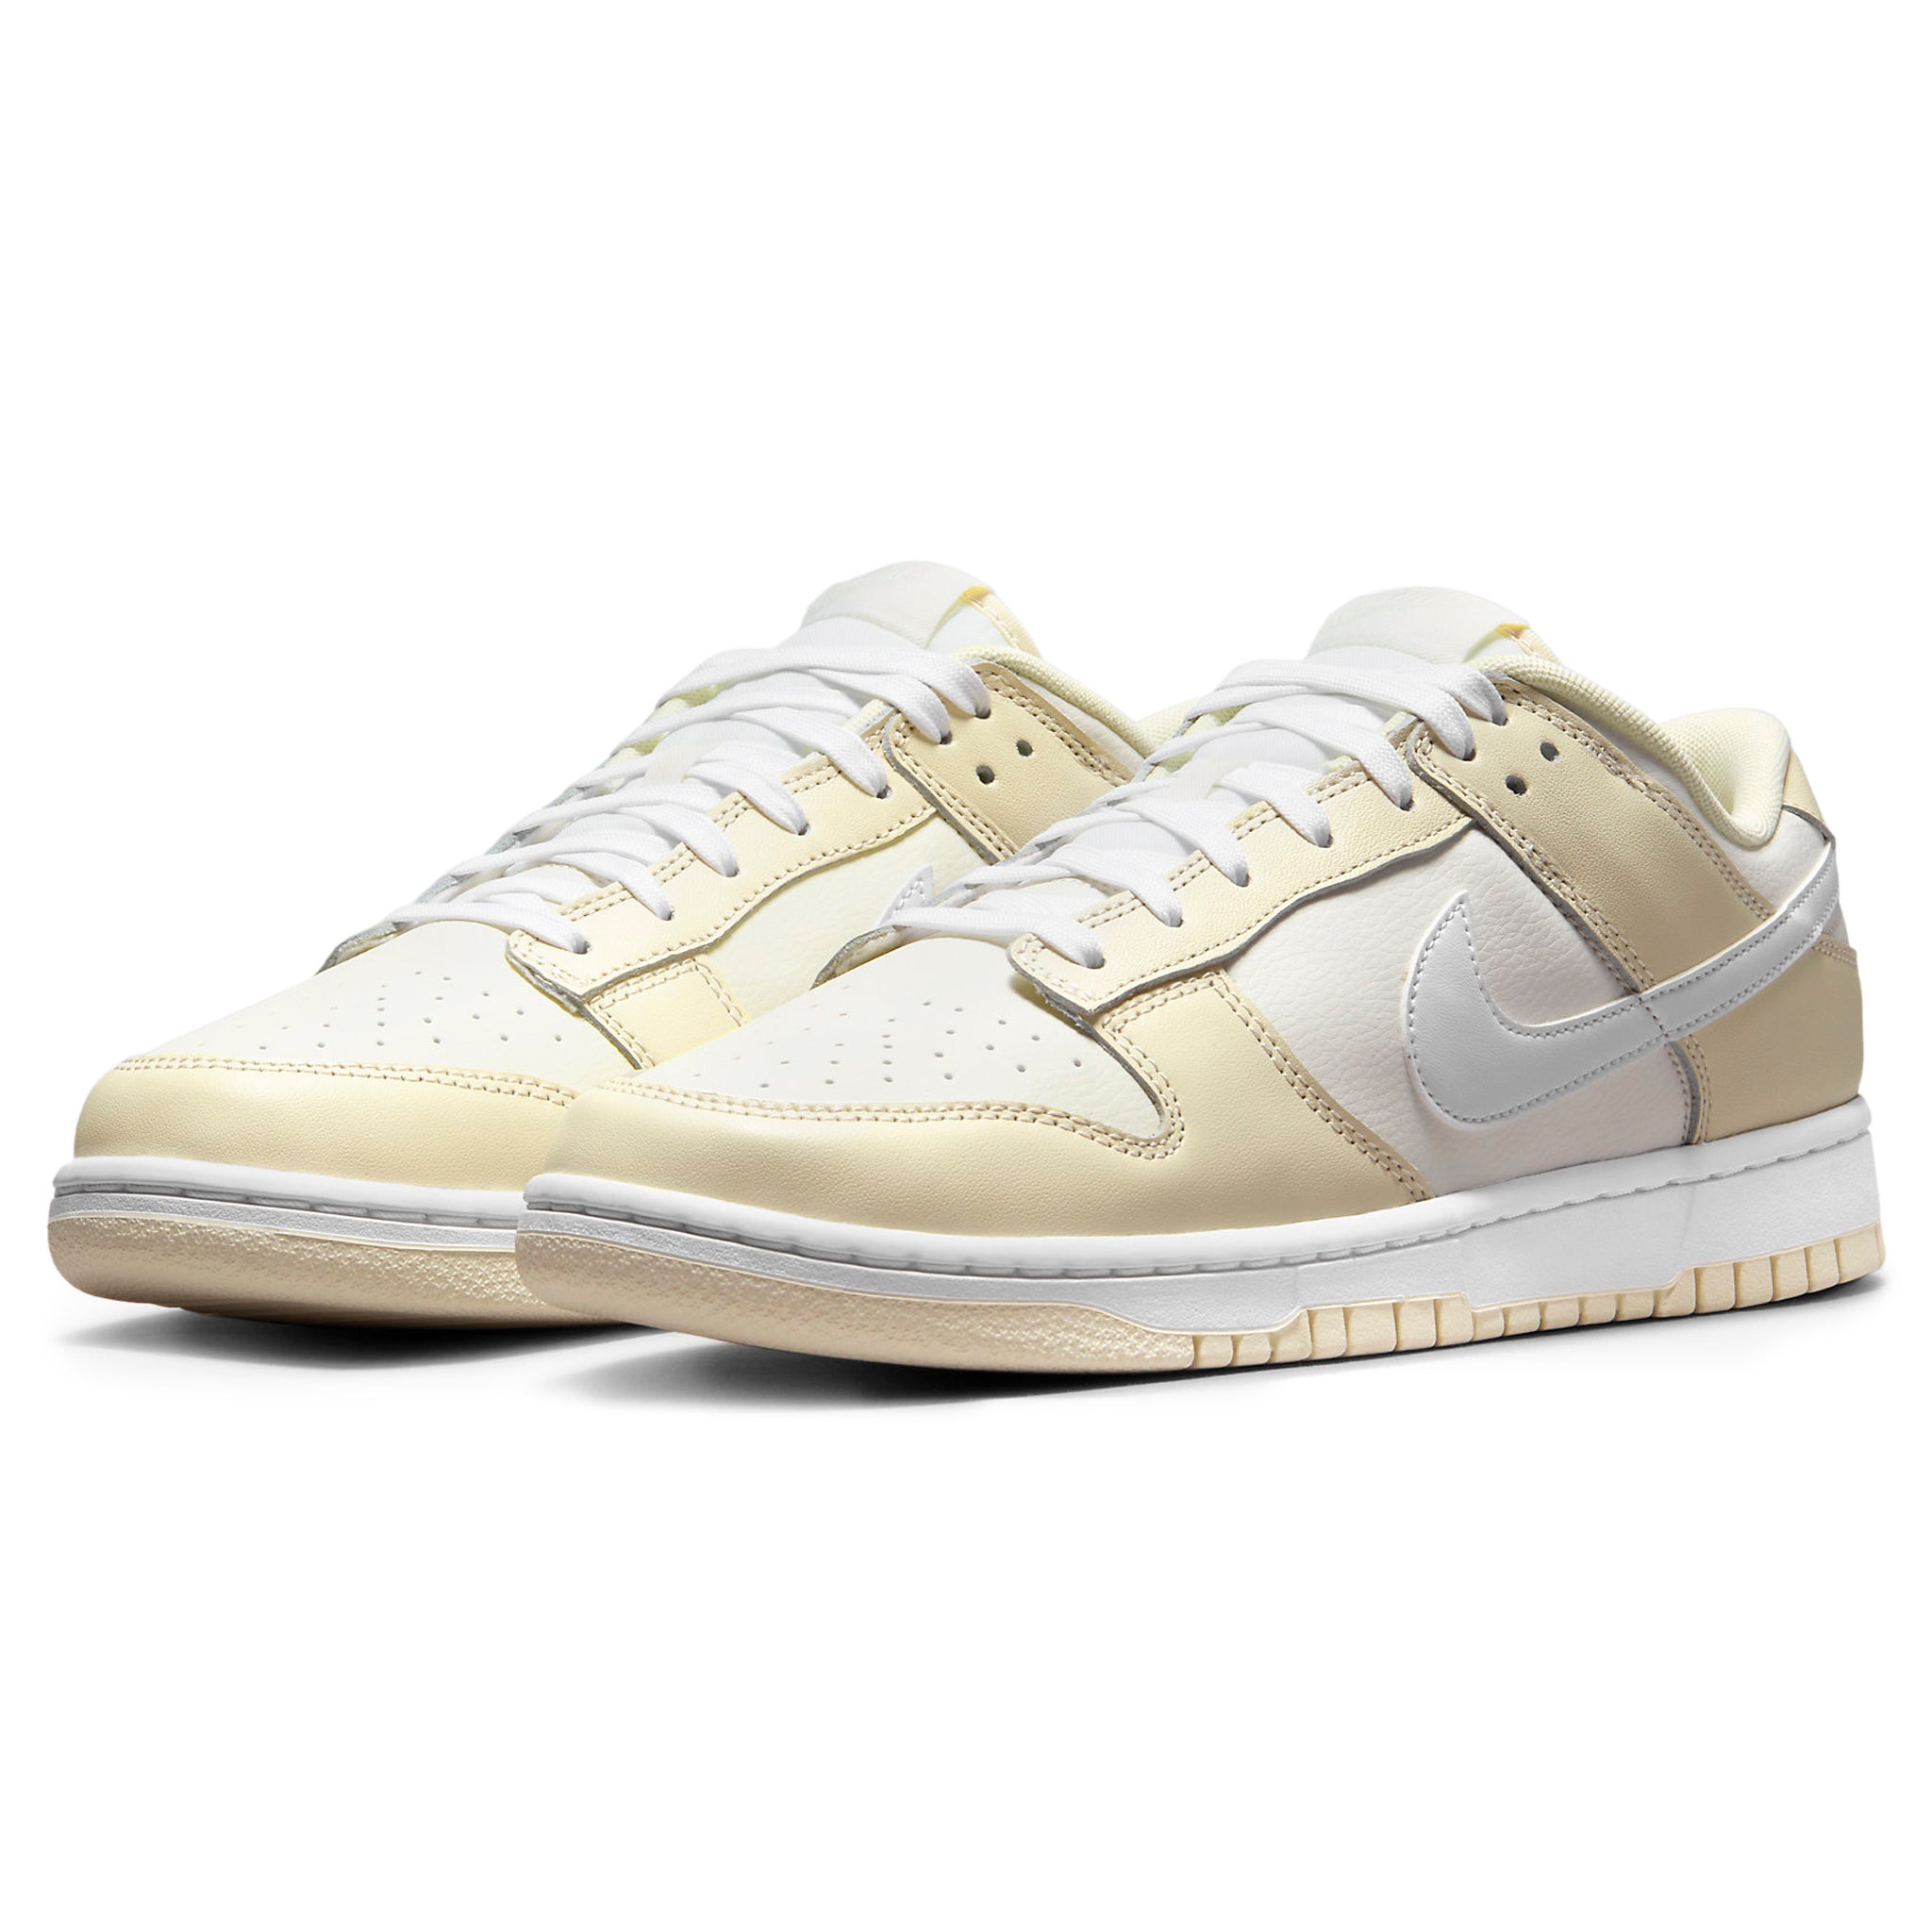 Front side view of Nike Dunk Low Coconut Milk DJ6188-100